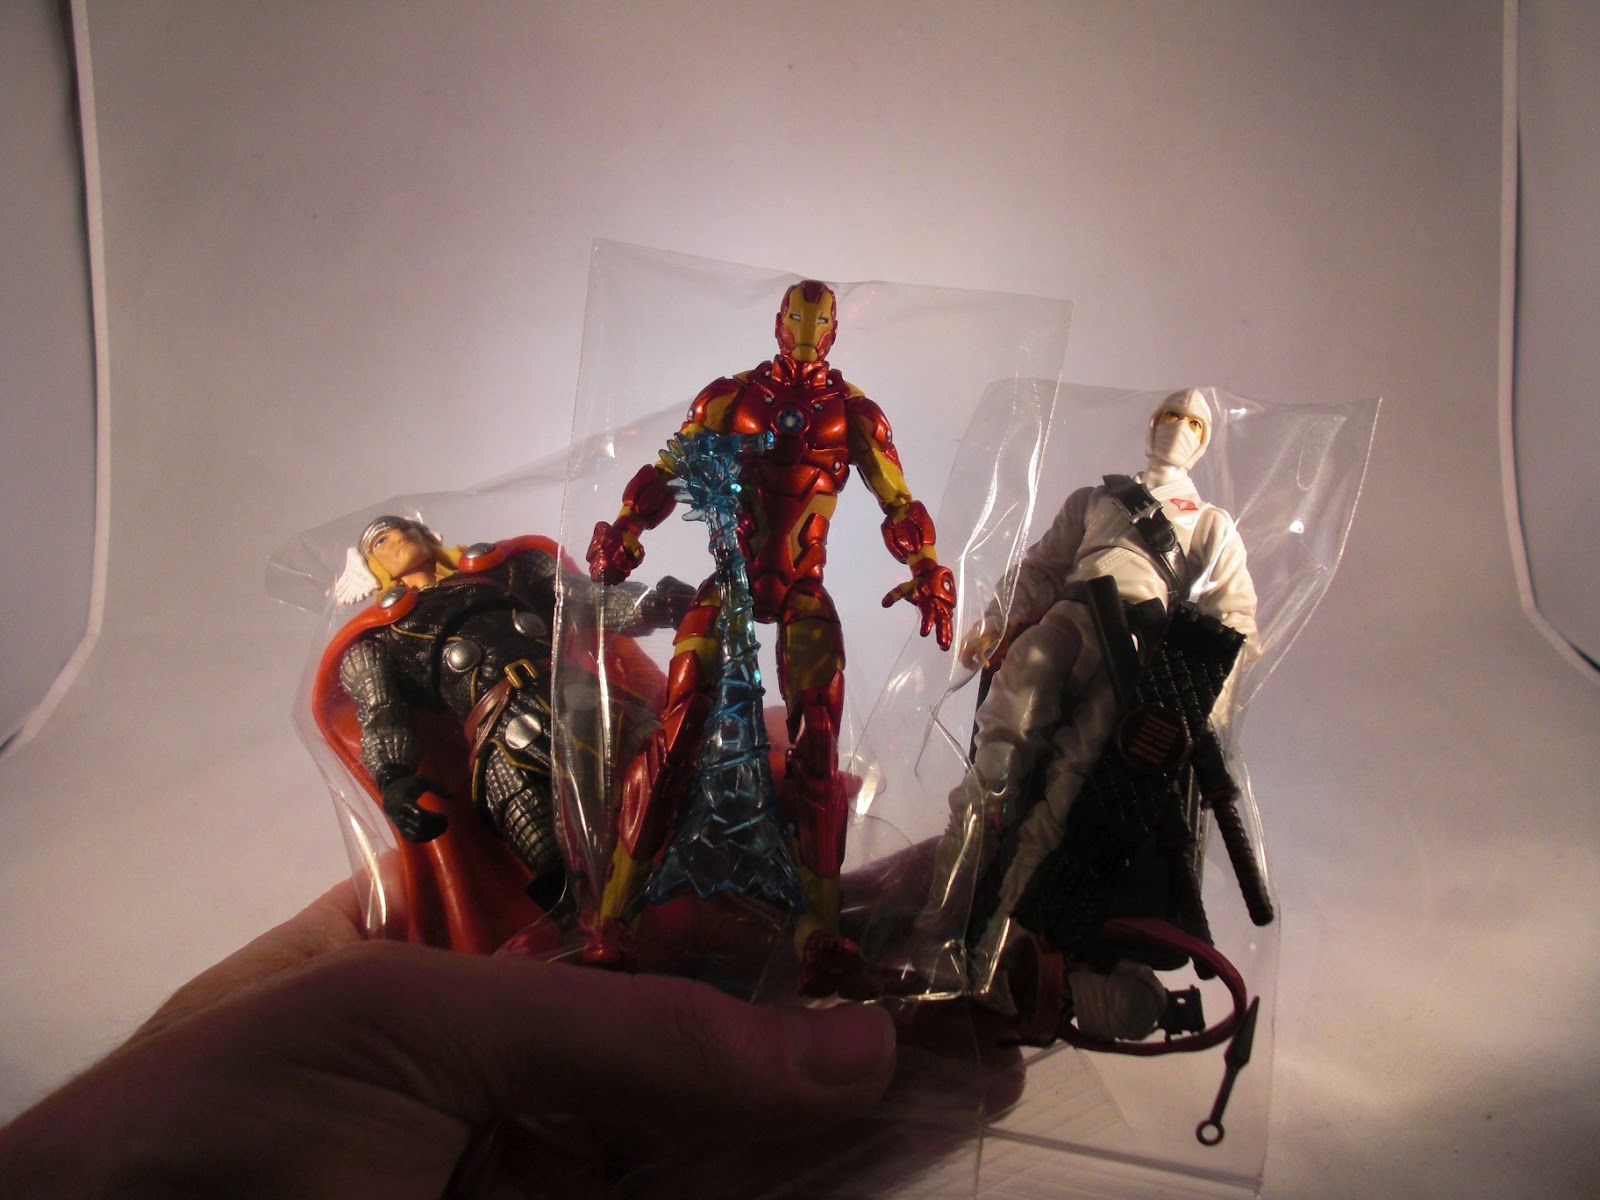 polypropylene bags for action figures